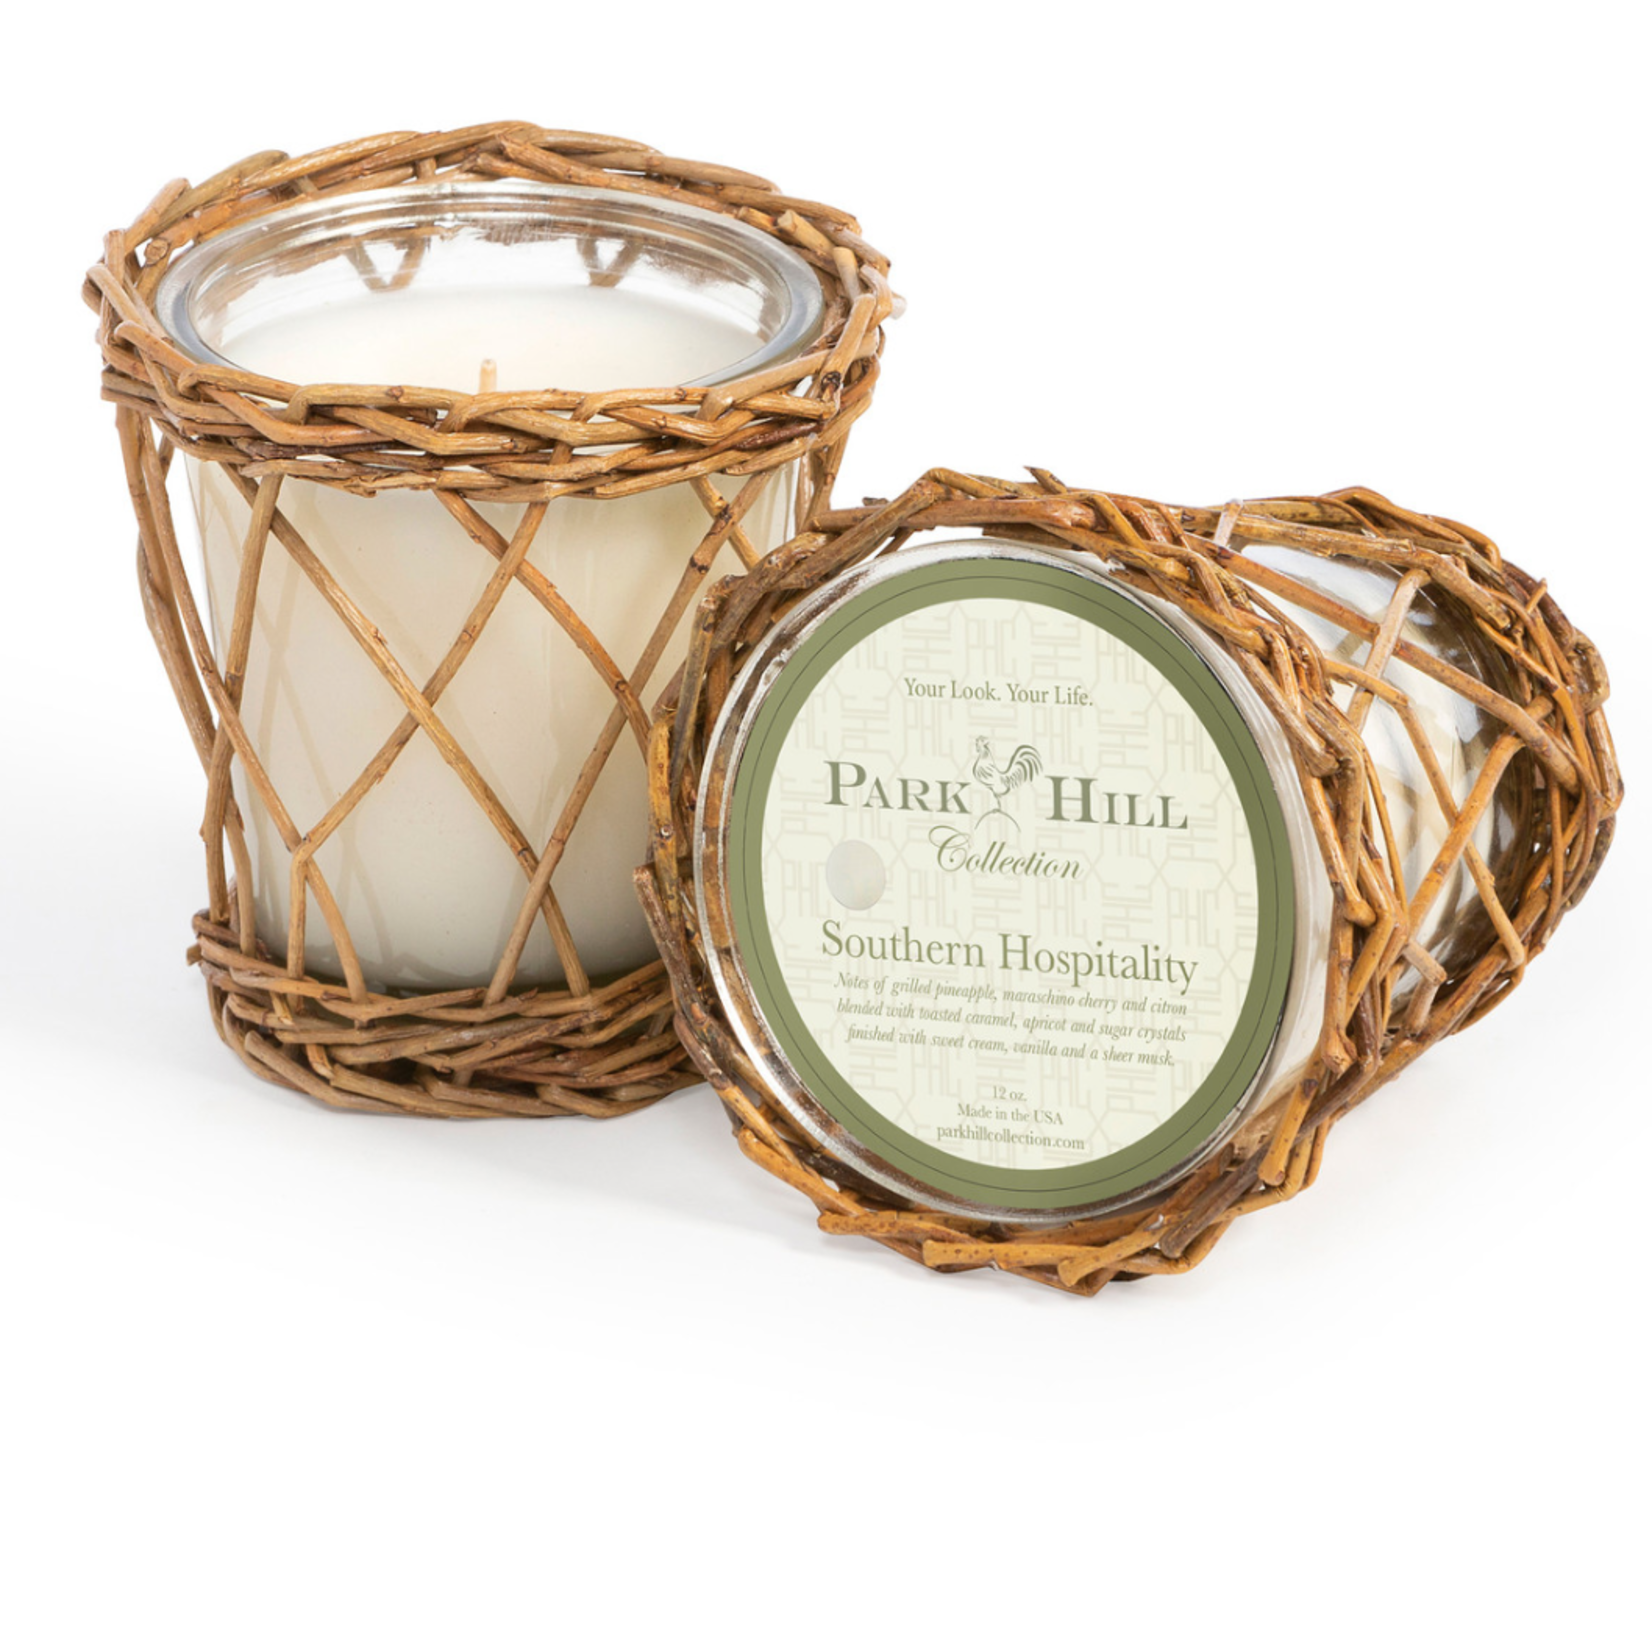 Willow Candle